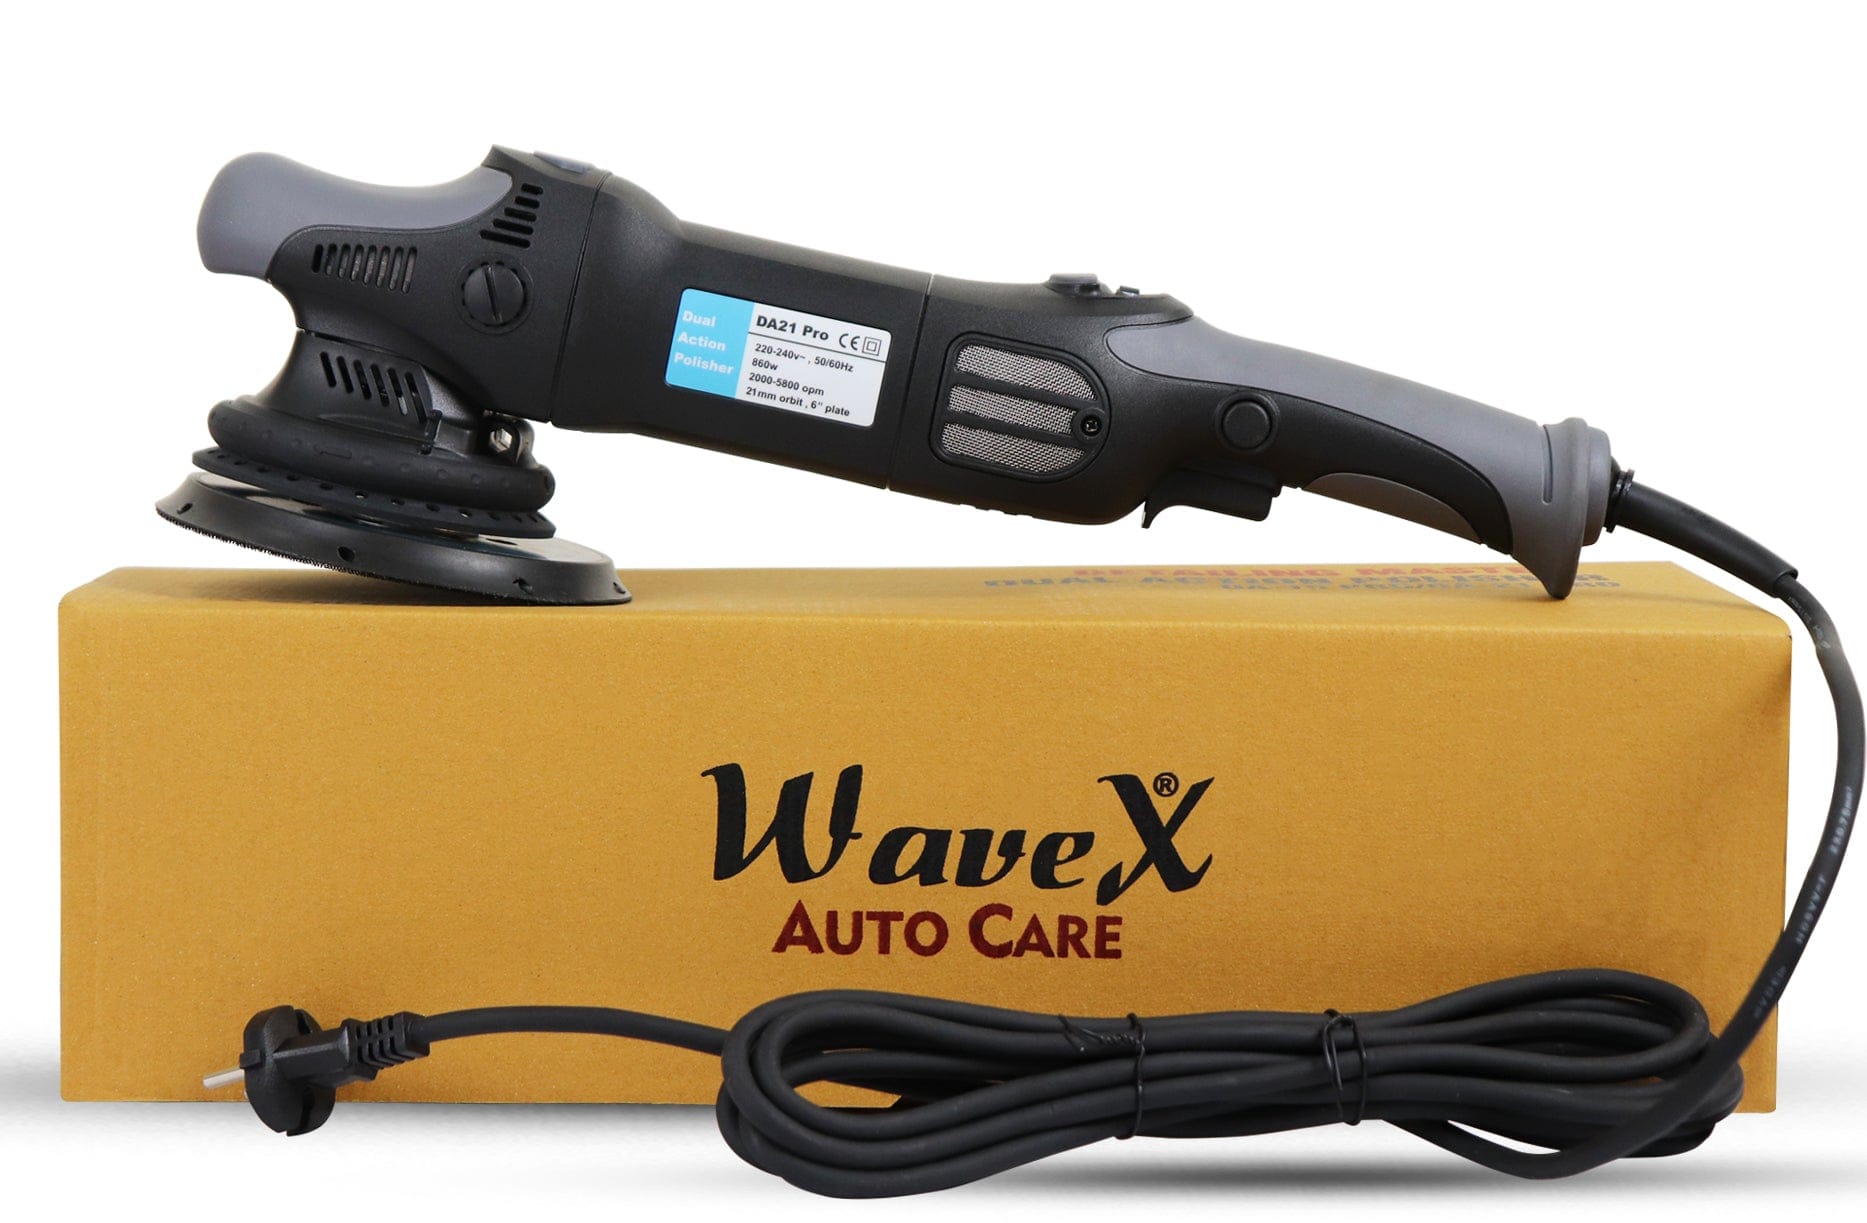 Wavex Detailing Master, Dual Action Polisher Machine for Car Detailing, Polishing and Buffing